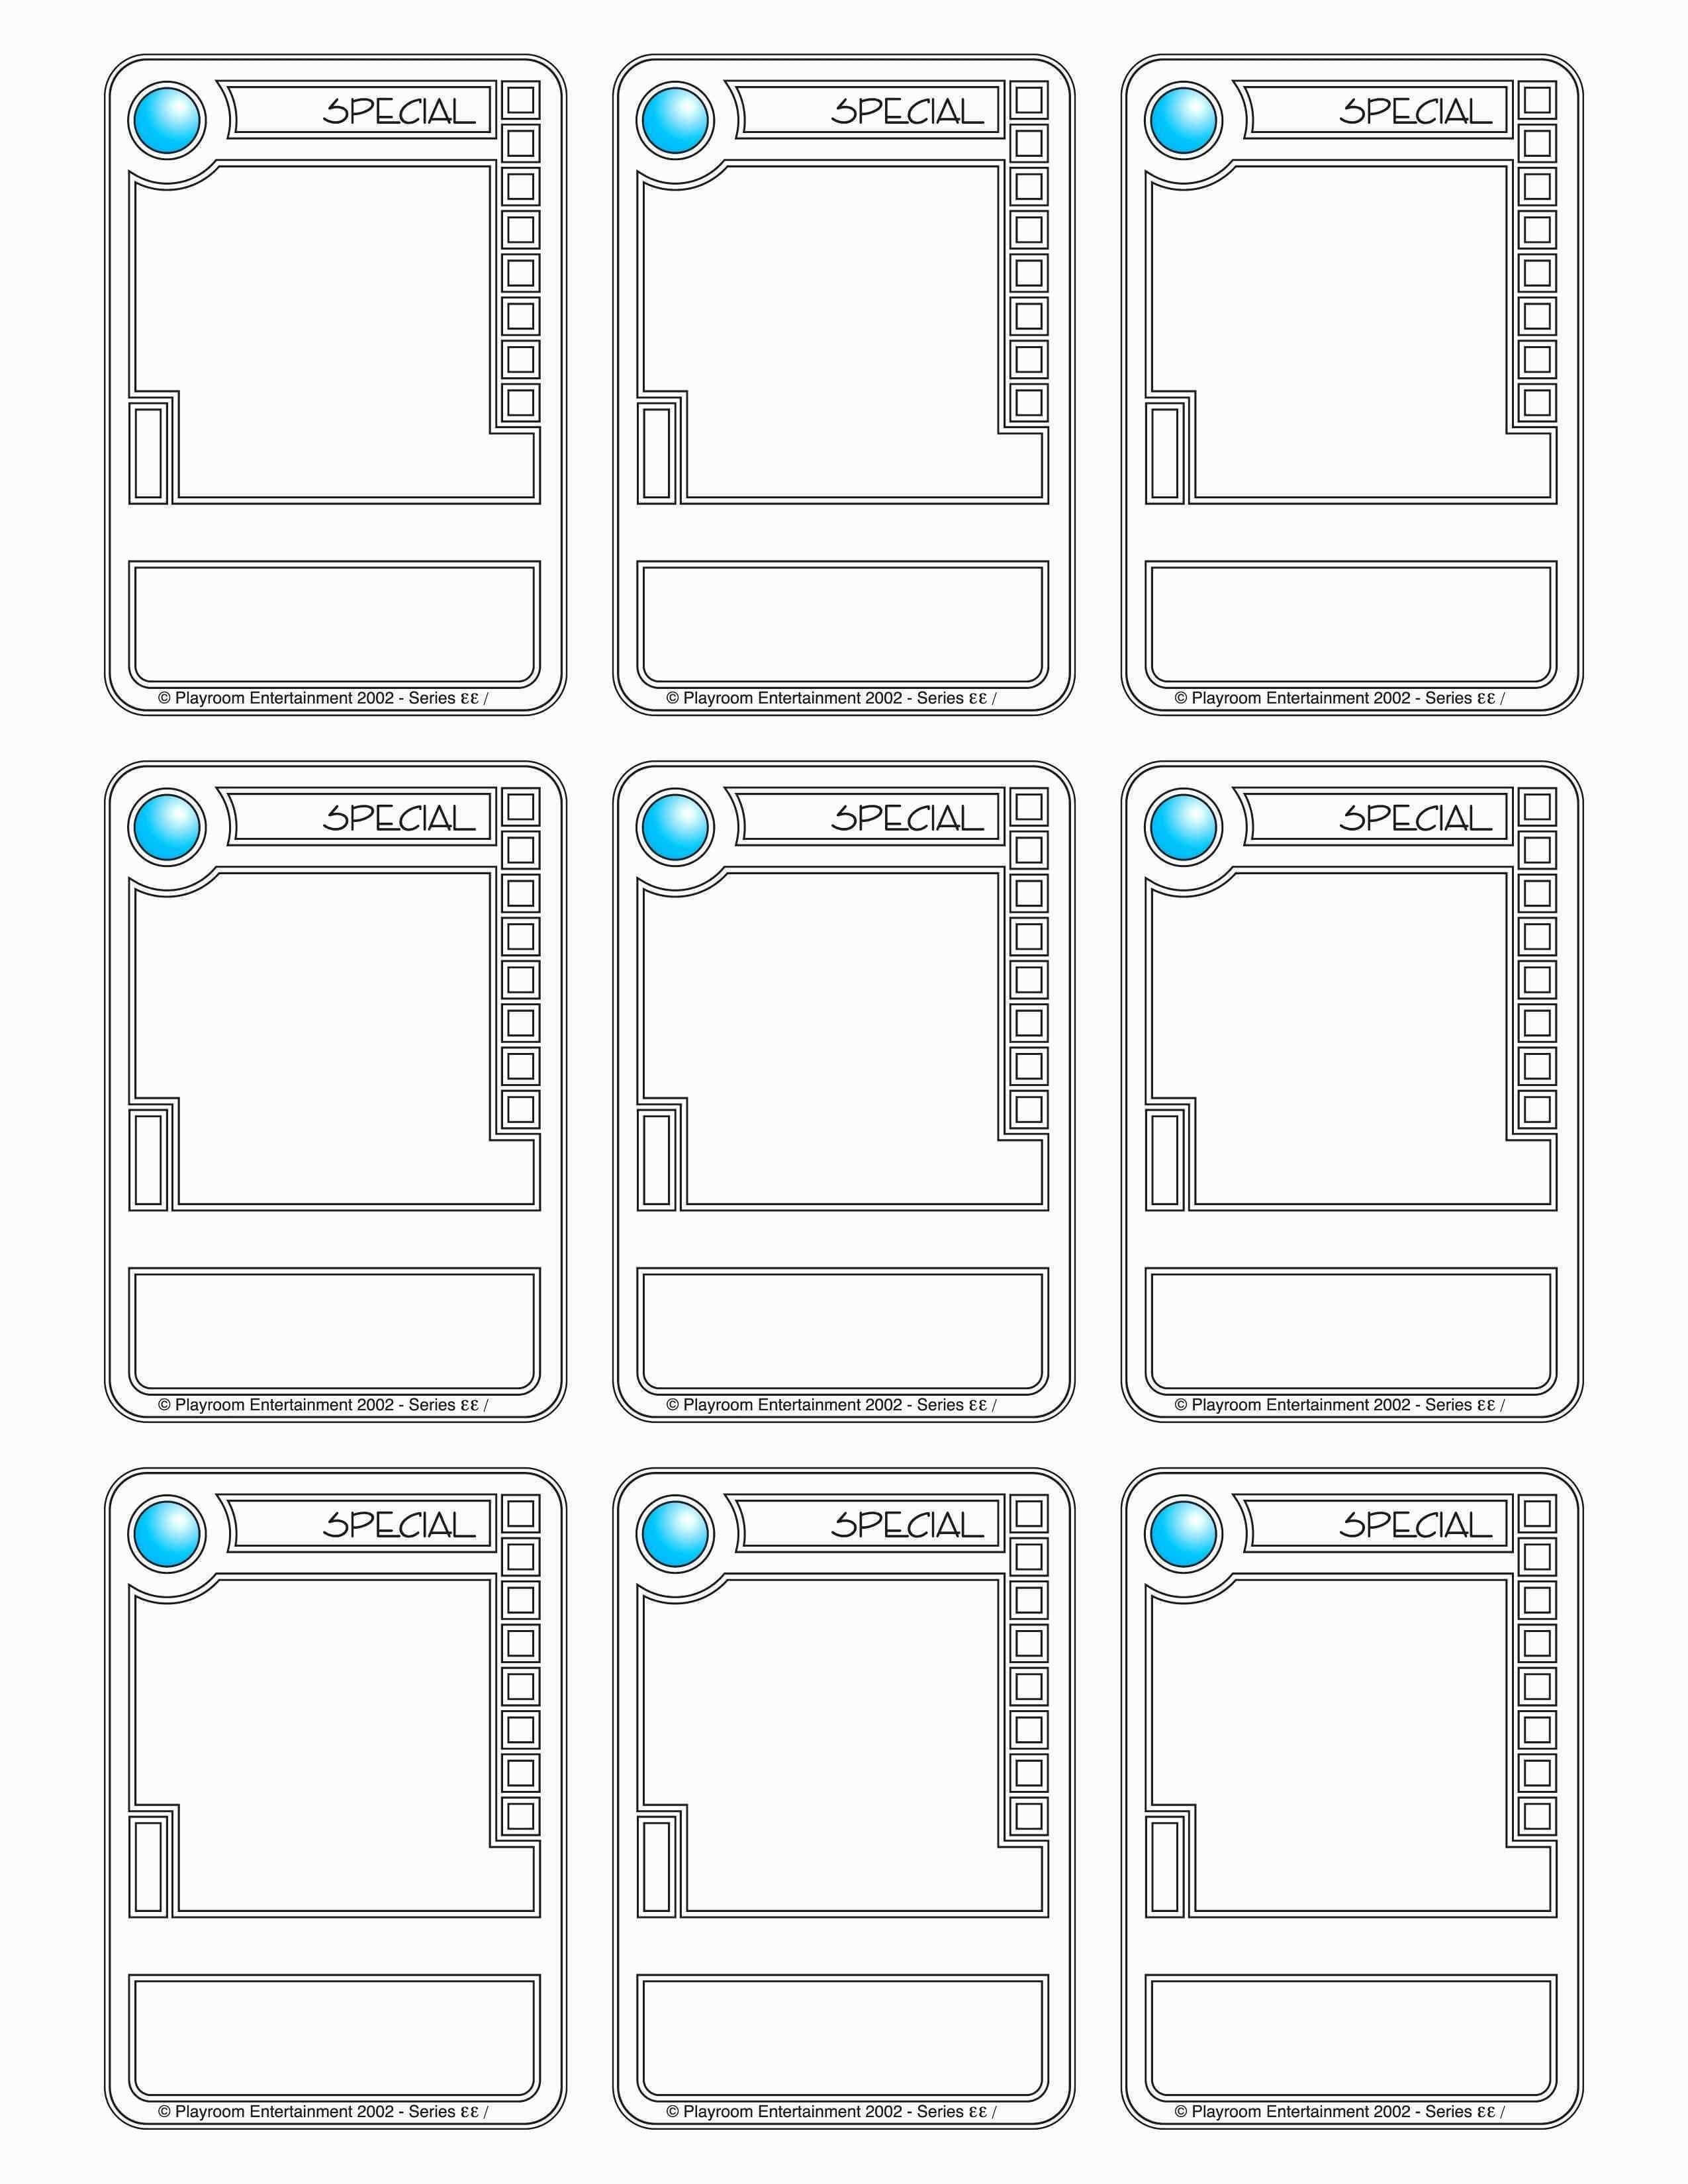 001 Examples Free Trading Card Template Maker For Success In Trading Cards Templates Free Download